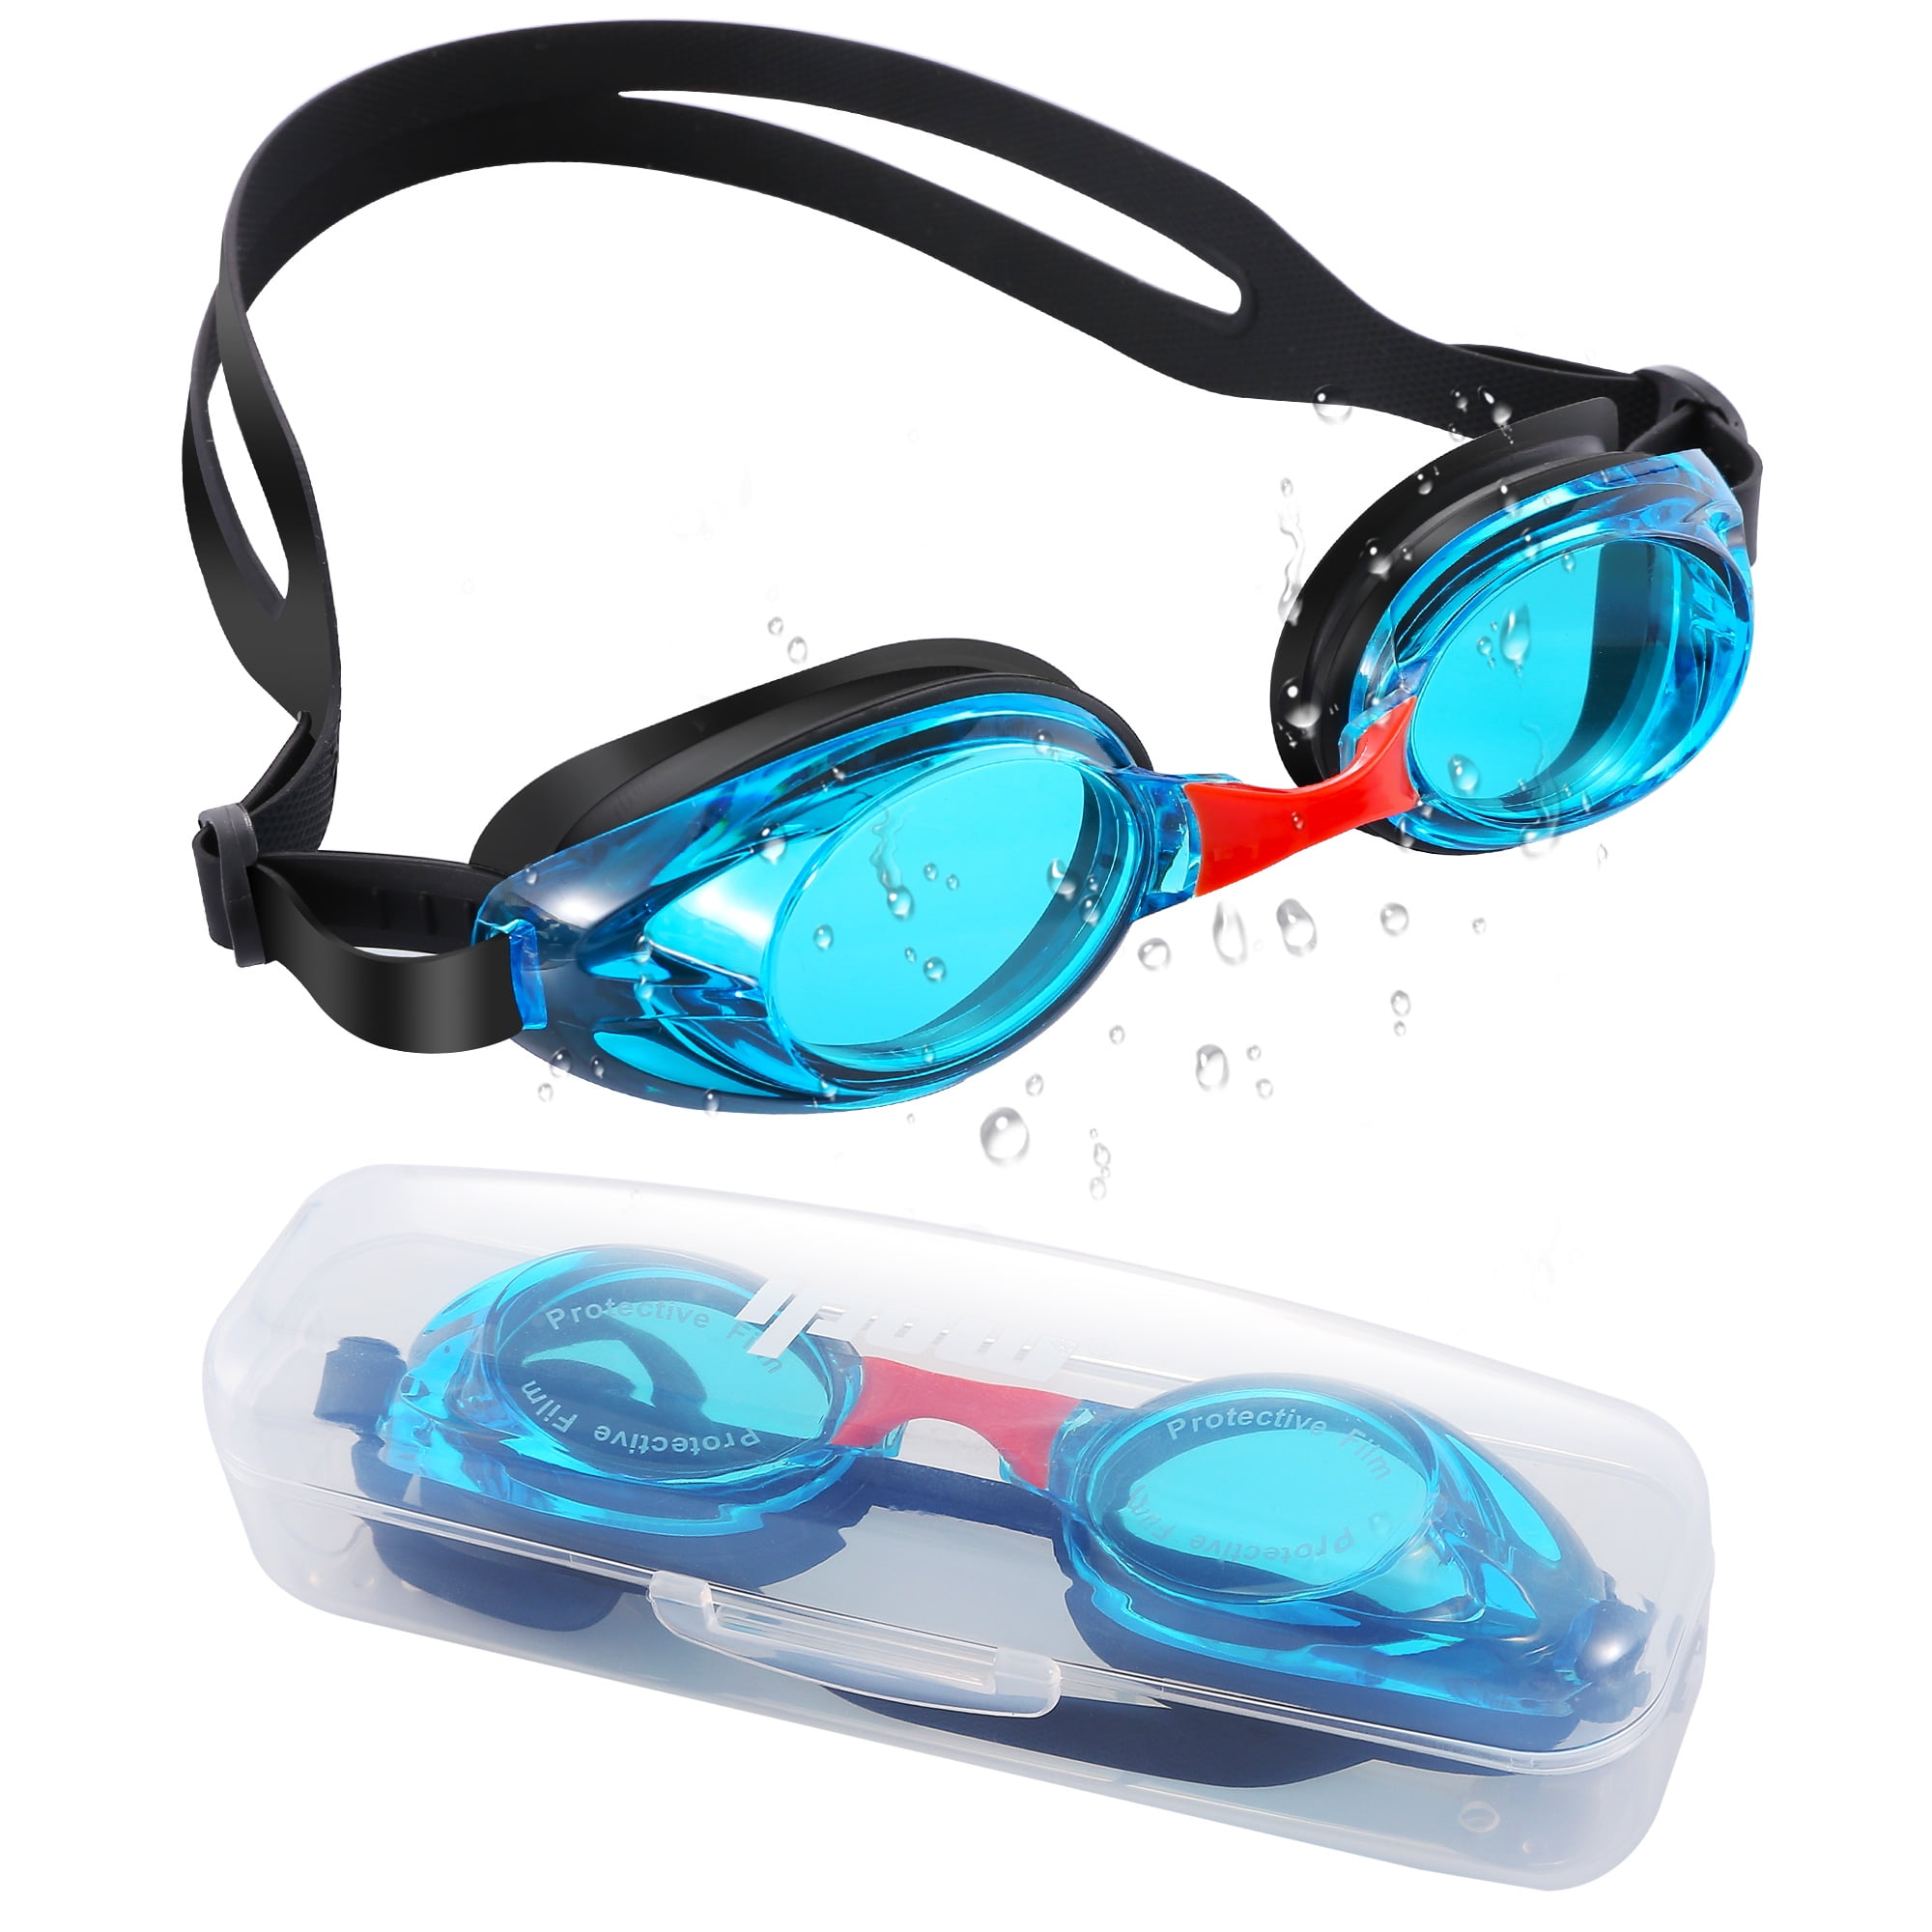 Xixik No Leaking Swimming Goggles Anti-Fog UV Protection Waterproof Premium Youth Childrens Swimming Goggles for Adults Men Women black